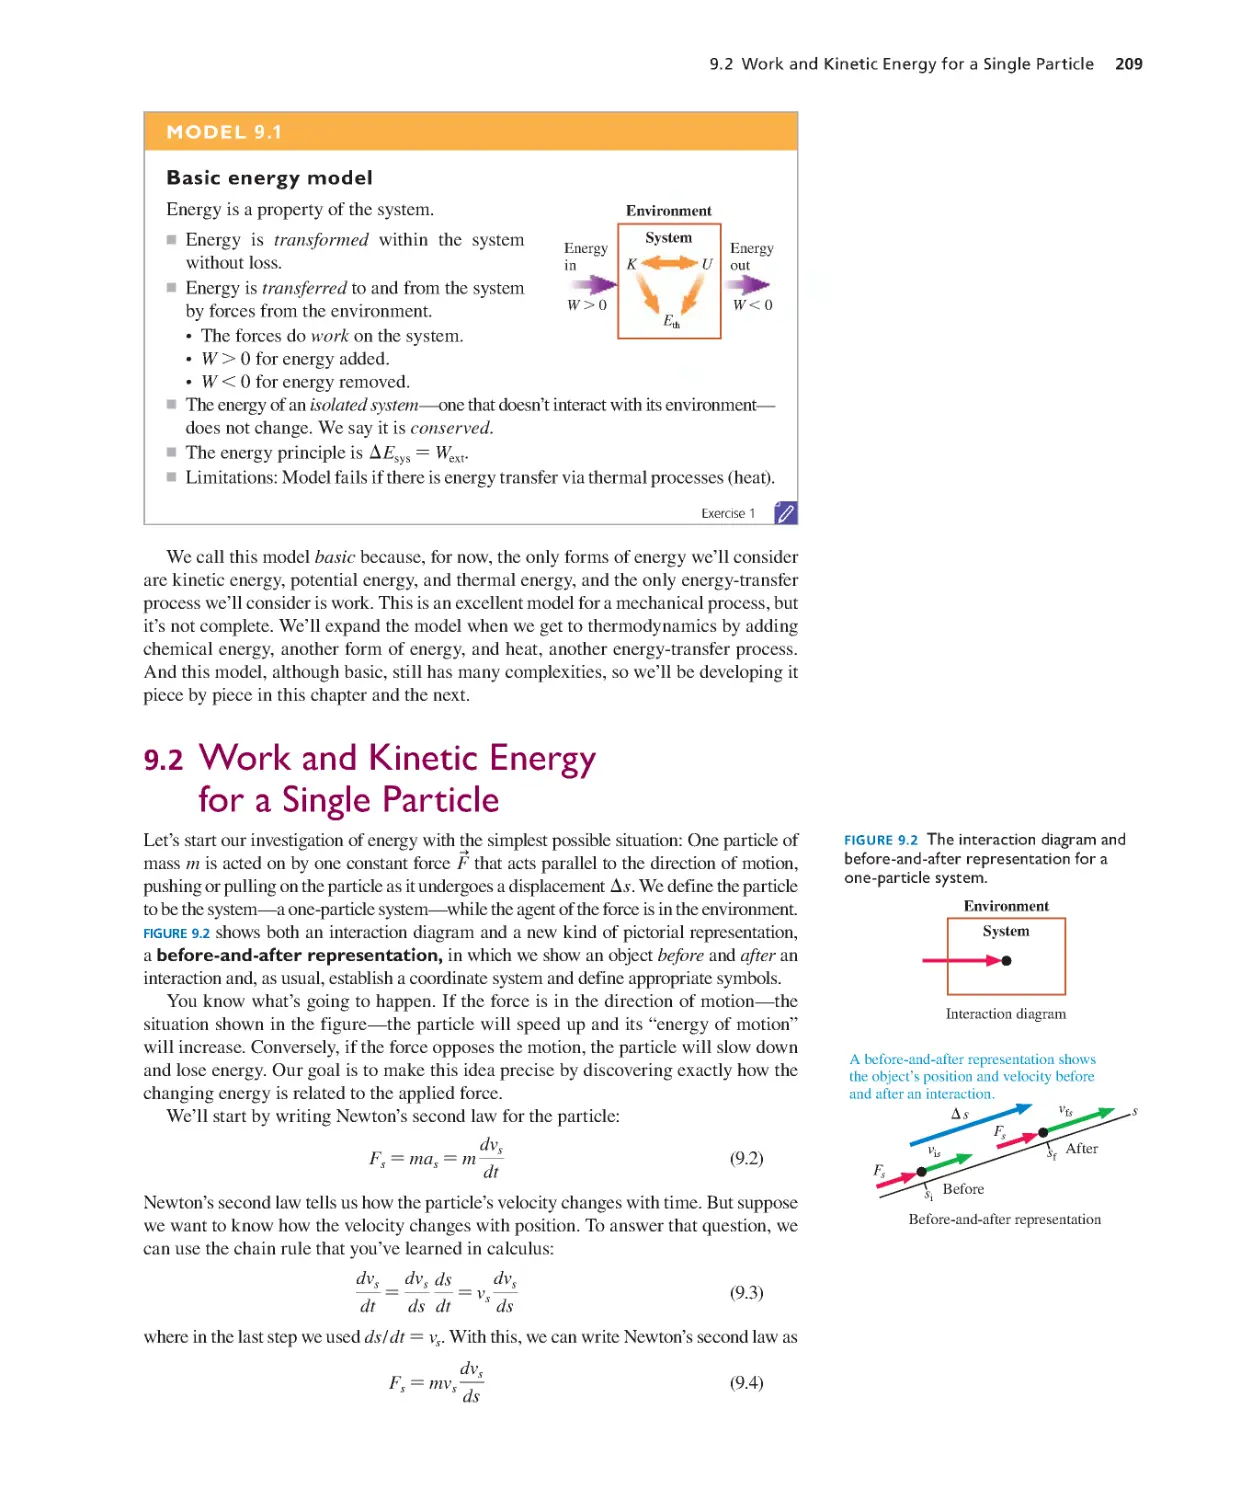 9.2. Work and Kinetic Energy for a Single Particle